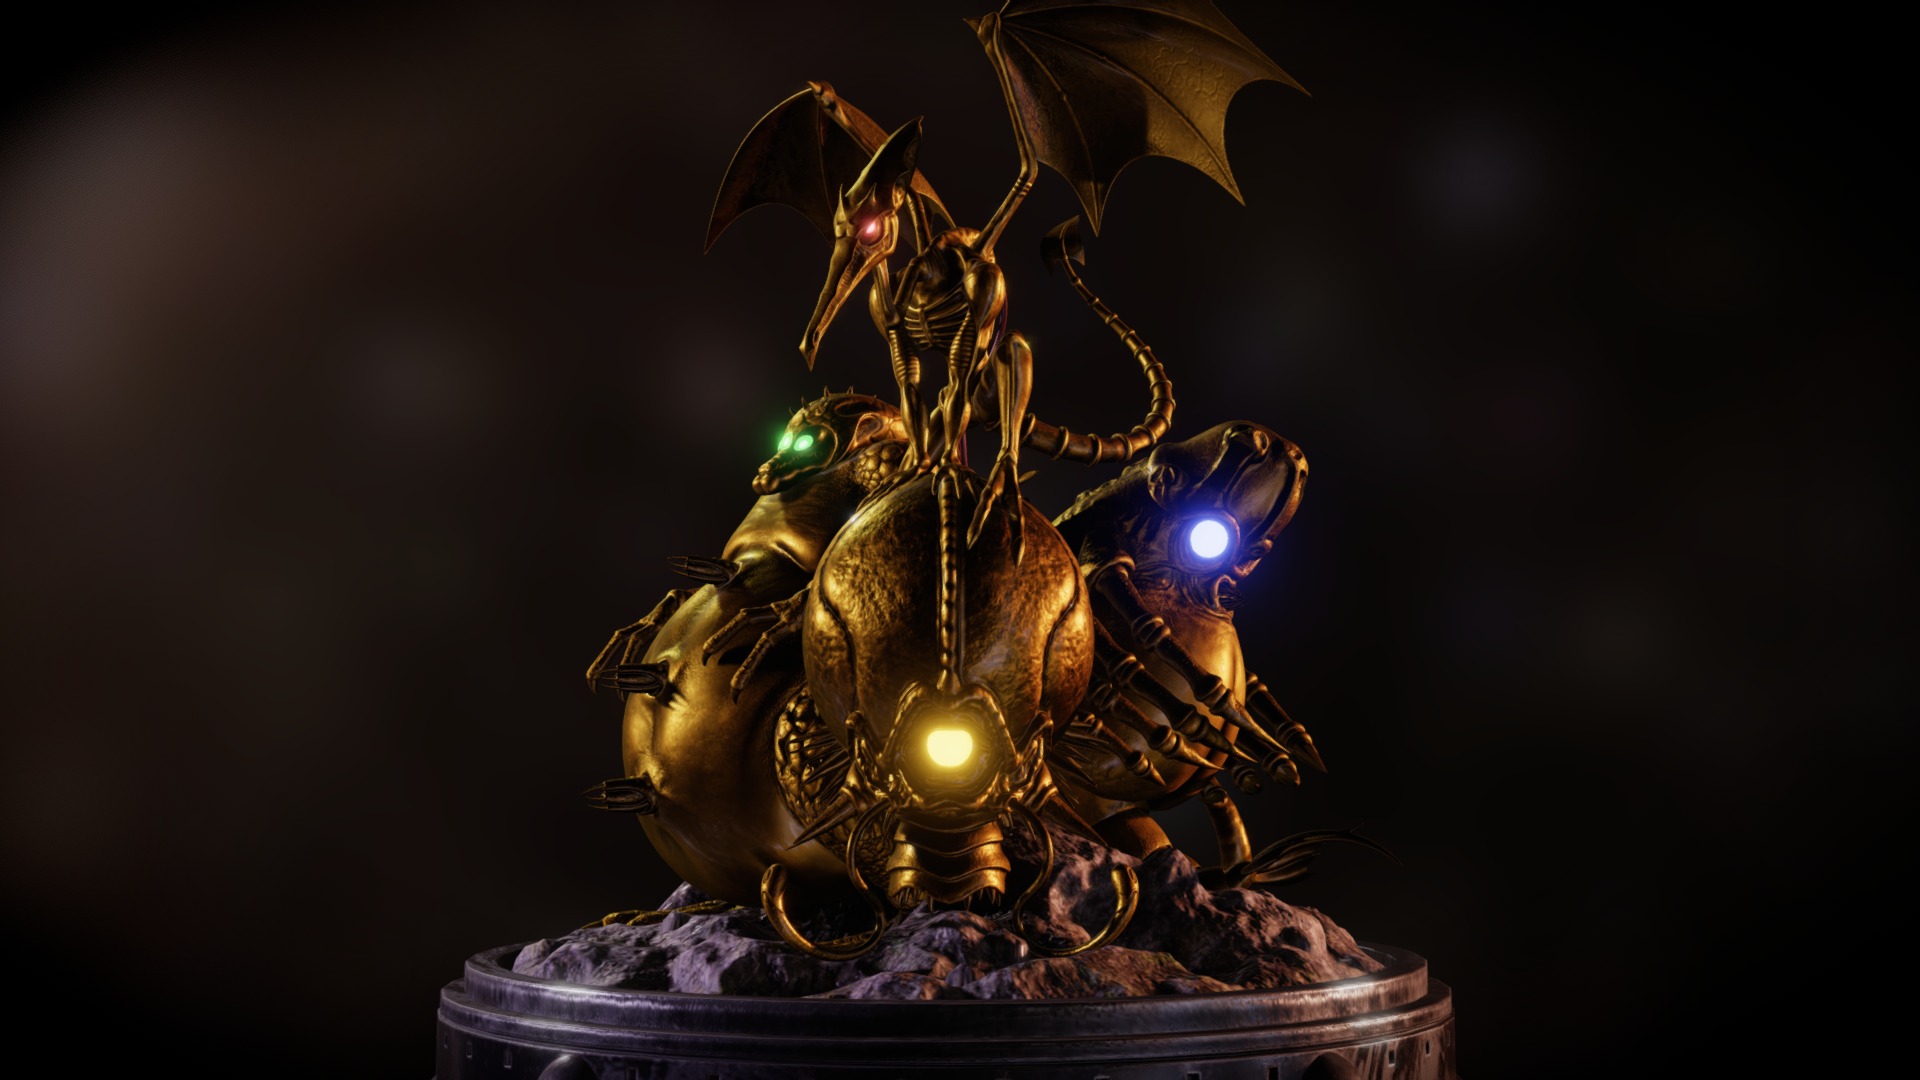 3D model Super Metroid Golden Statue - This is a 3D model of the Super Metroid Golden Statue. The 3D model is about a statue of a dragon.